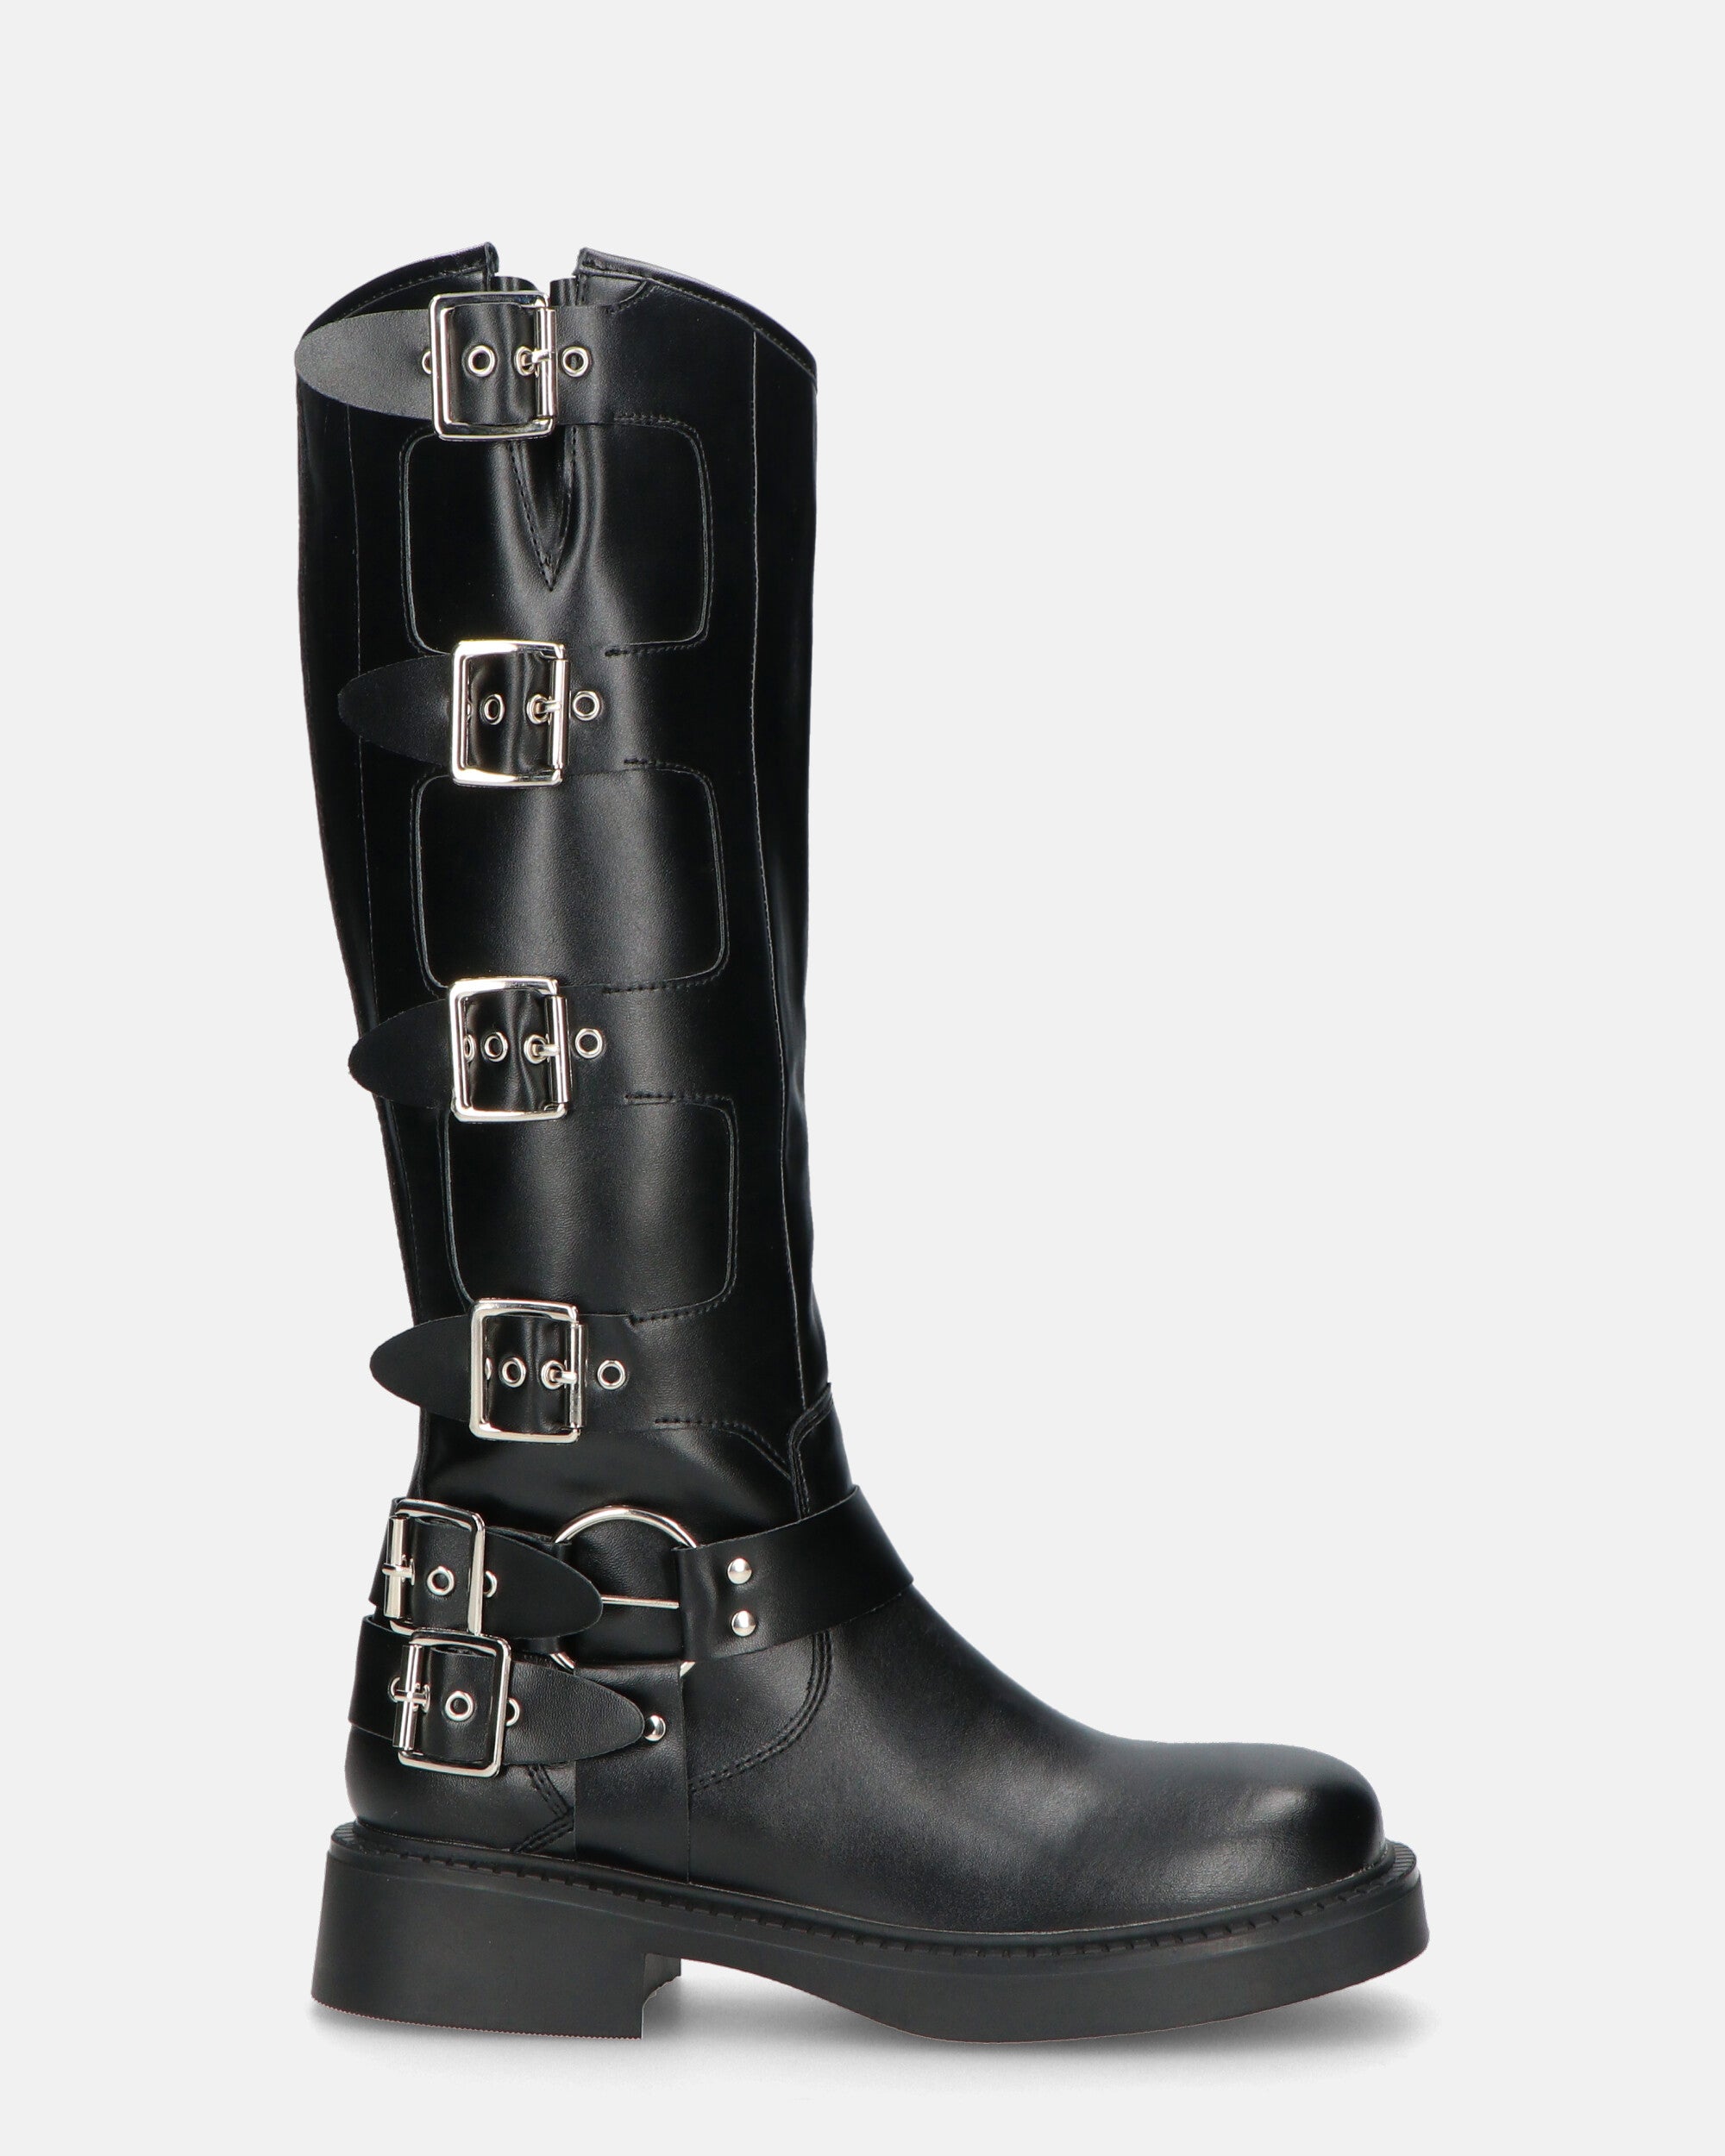 NYX - high amphibious boots with straps